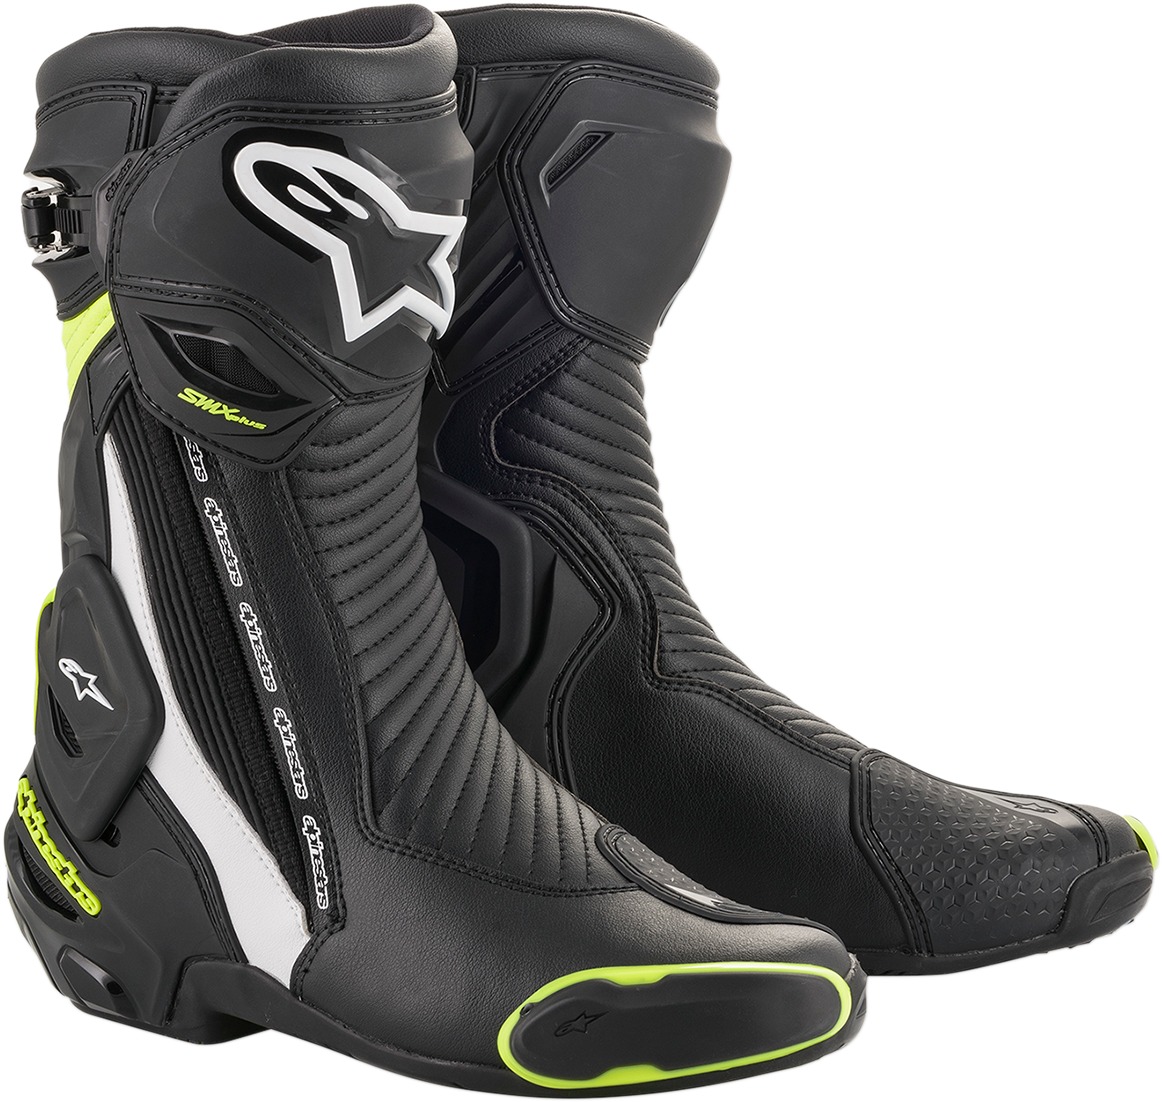 SMX Plus Street Riding Boots Black/White/Yellow US 7.5 - Click Image to Close